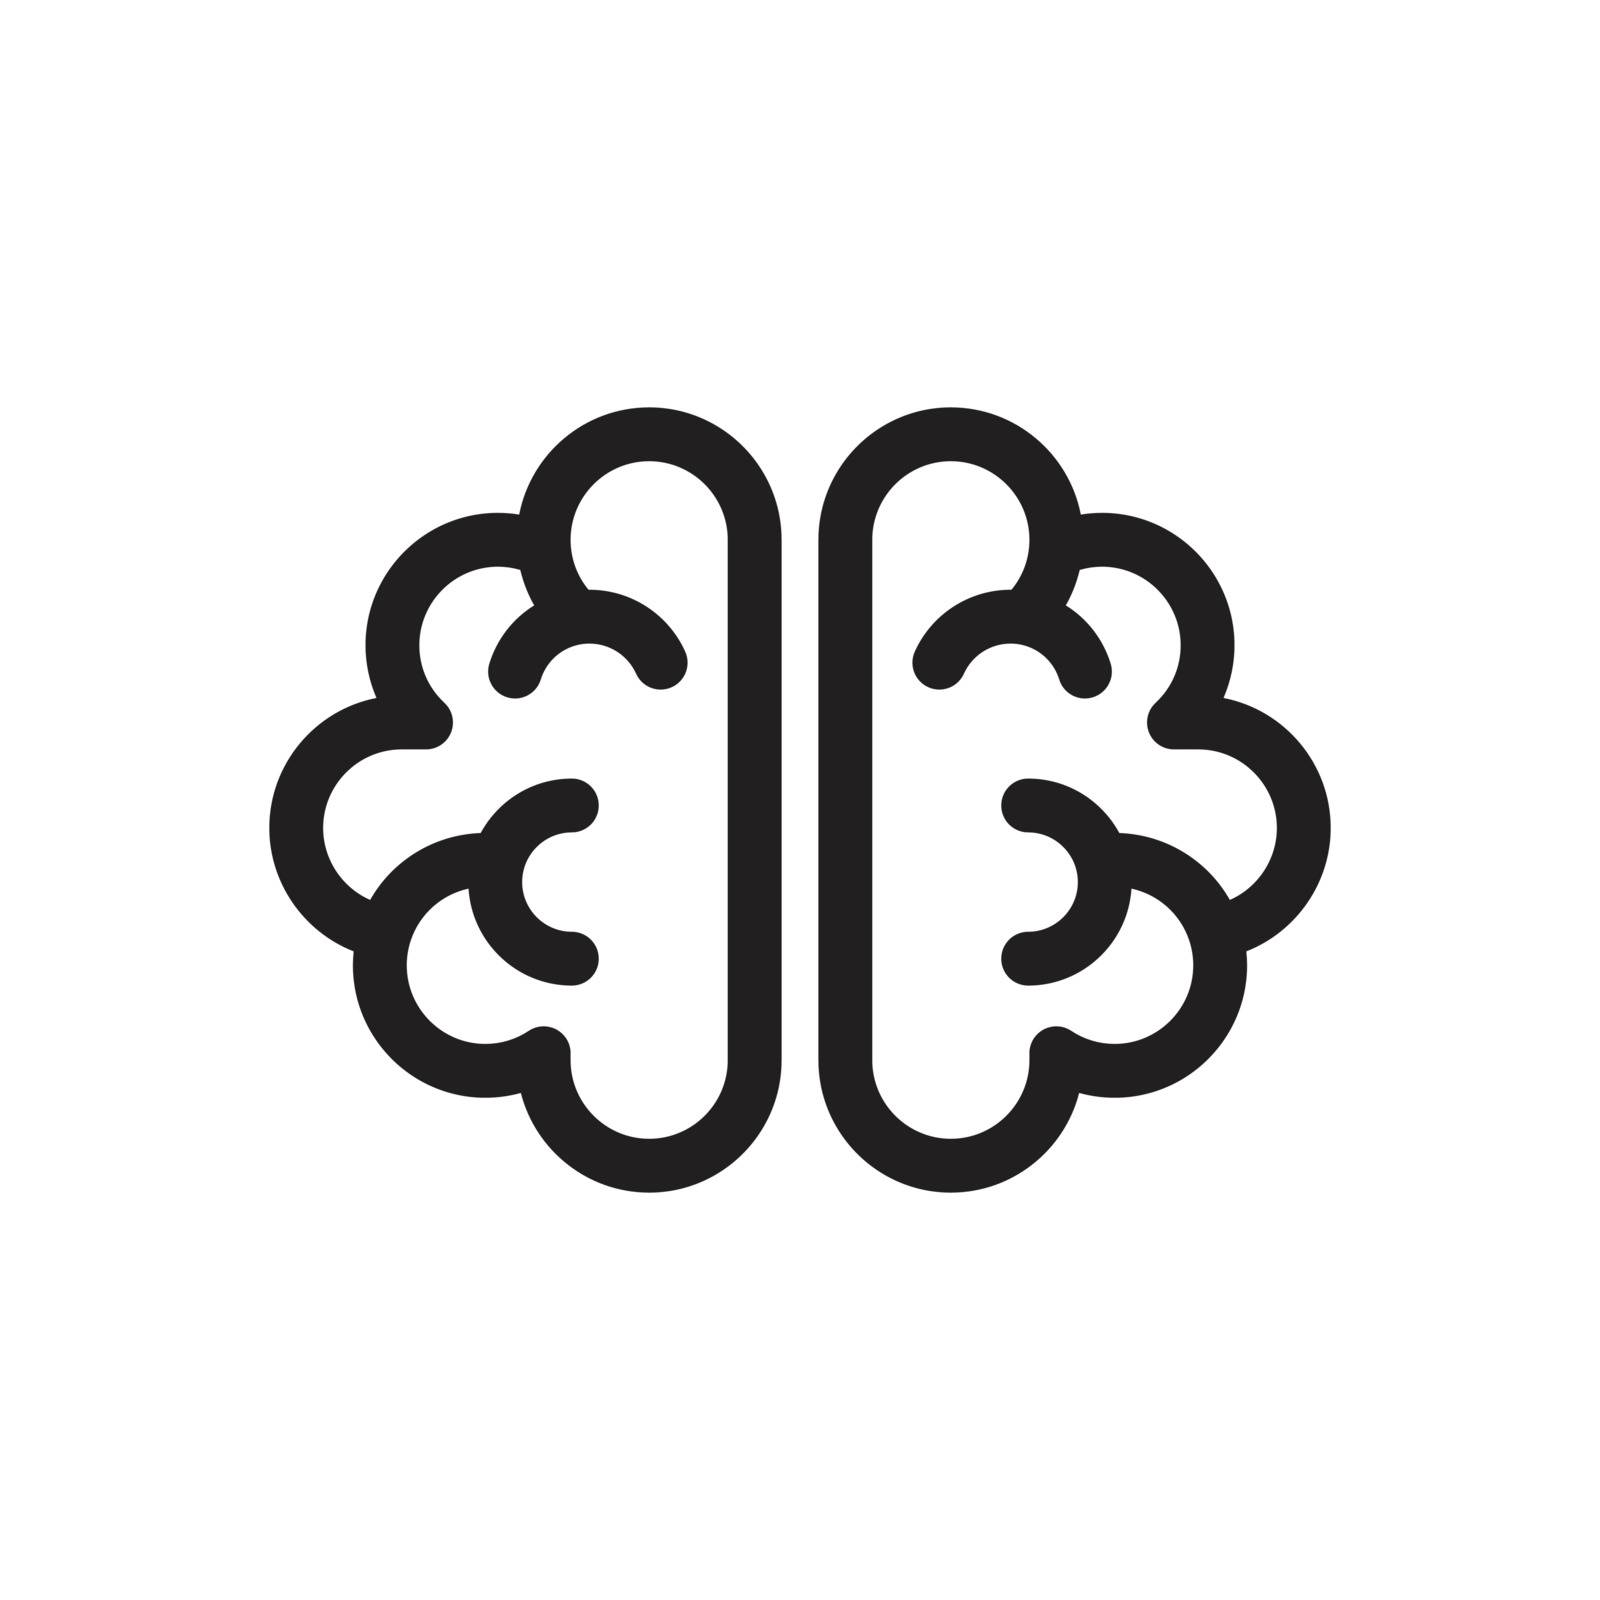 Thin line brain icon by ang_bay